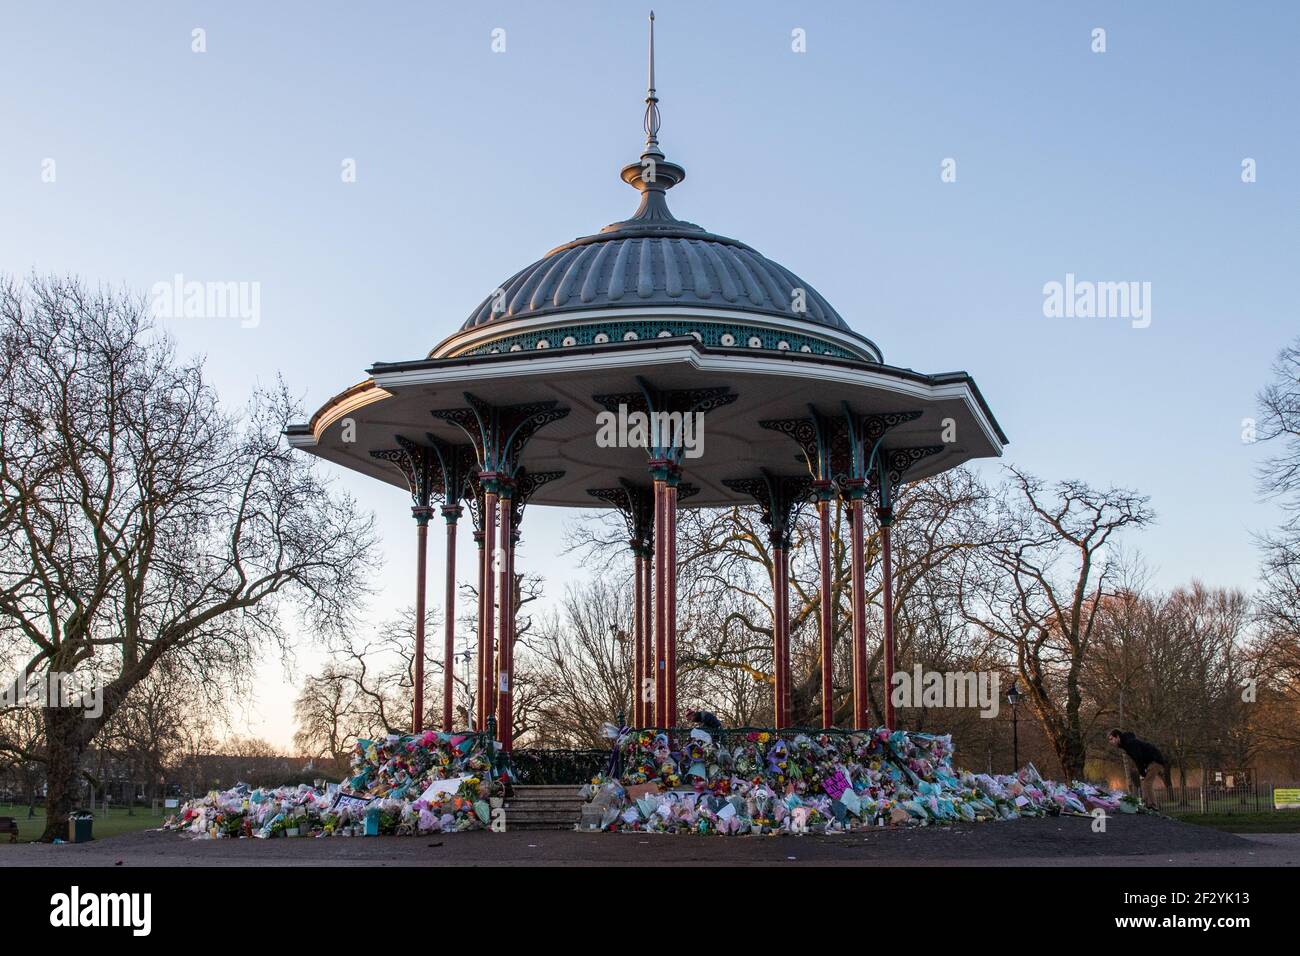 London, UK. 14th March, 2021. The flowers have been placed back neatly, and a few candles are still lit in memory of Sarah Everard and for women everywhere, following terrible scenes the night before where Police turned a peaceful vigil into an unsafe protest at Clapham Common Bandstand. Credit: Liam Asman/Alamy Live News Stock Photo